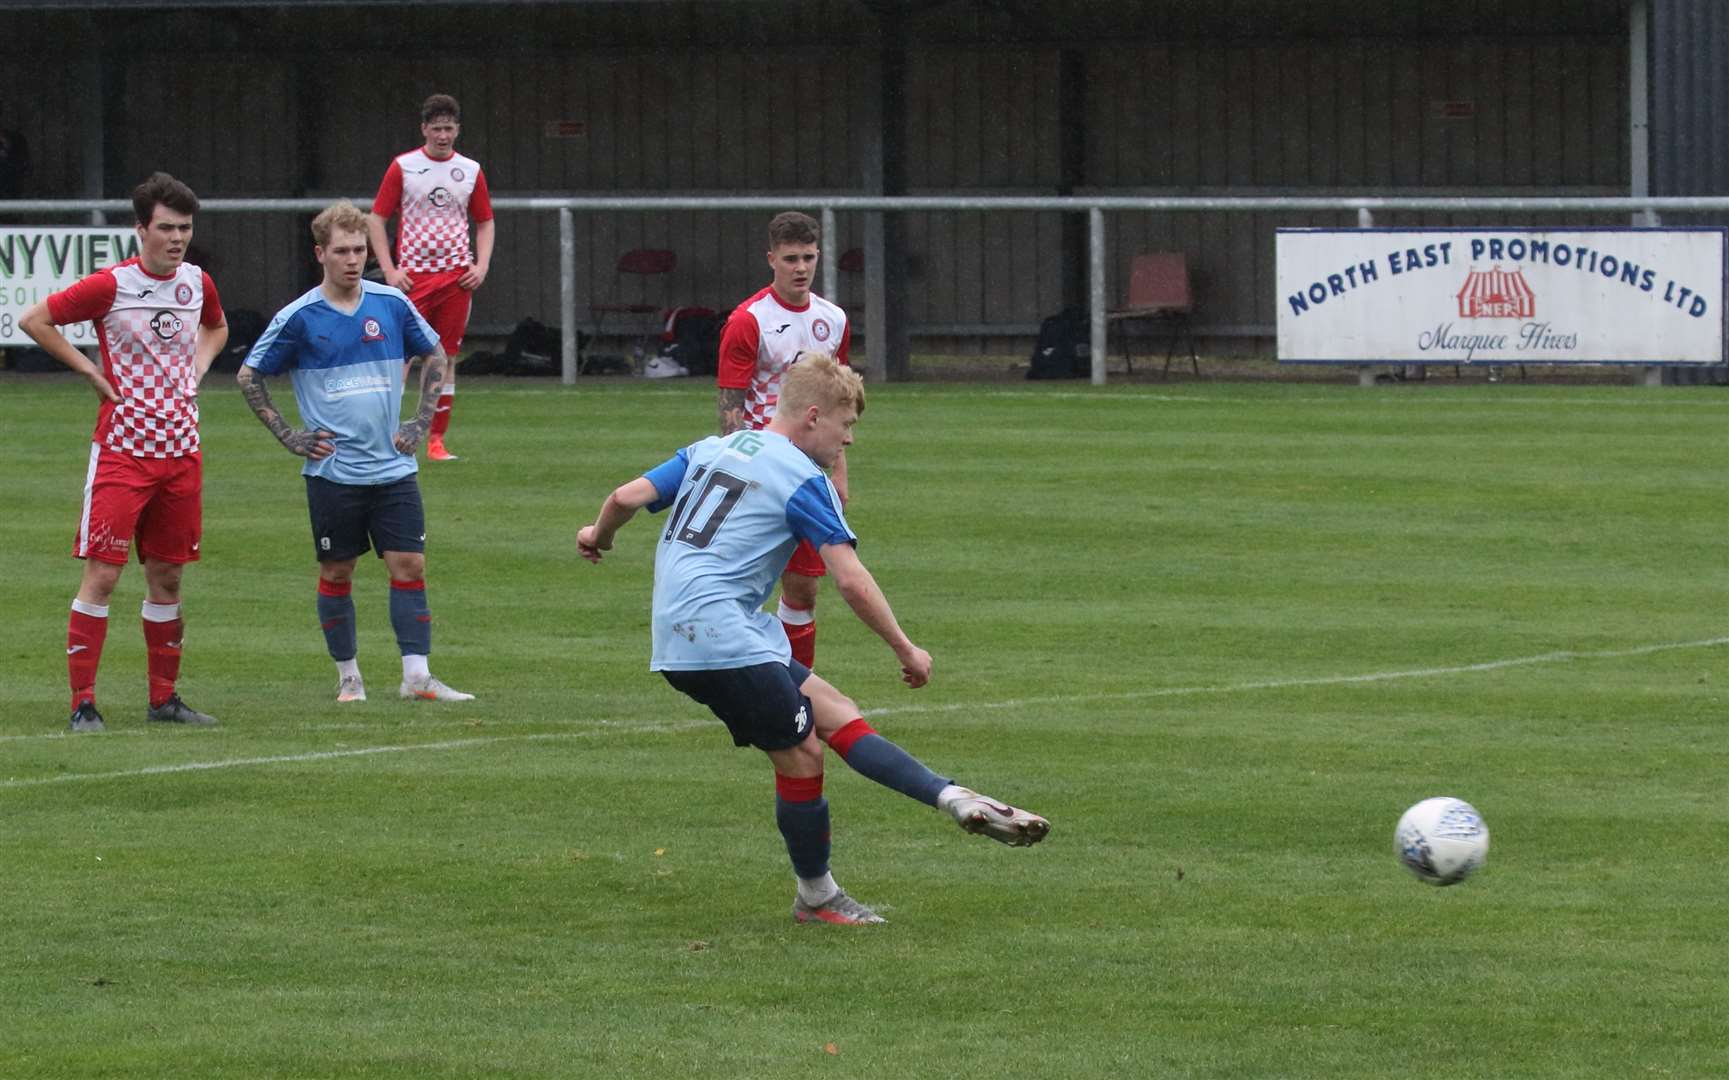 United's Tyler Mykyta fires a penalty at the Fyvie goal which as saved by the woodwork.